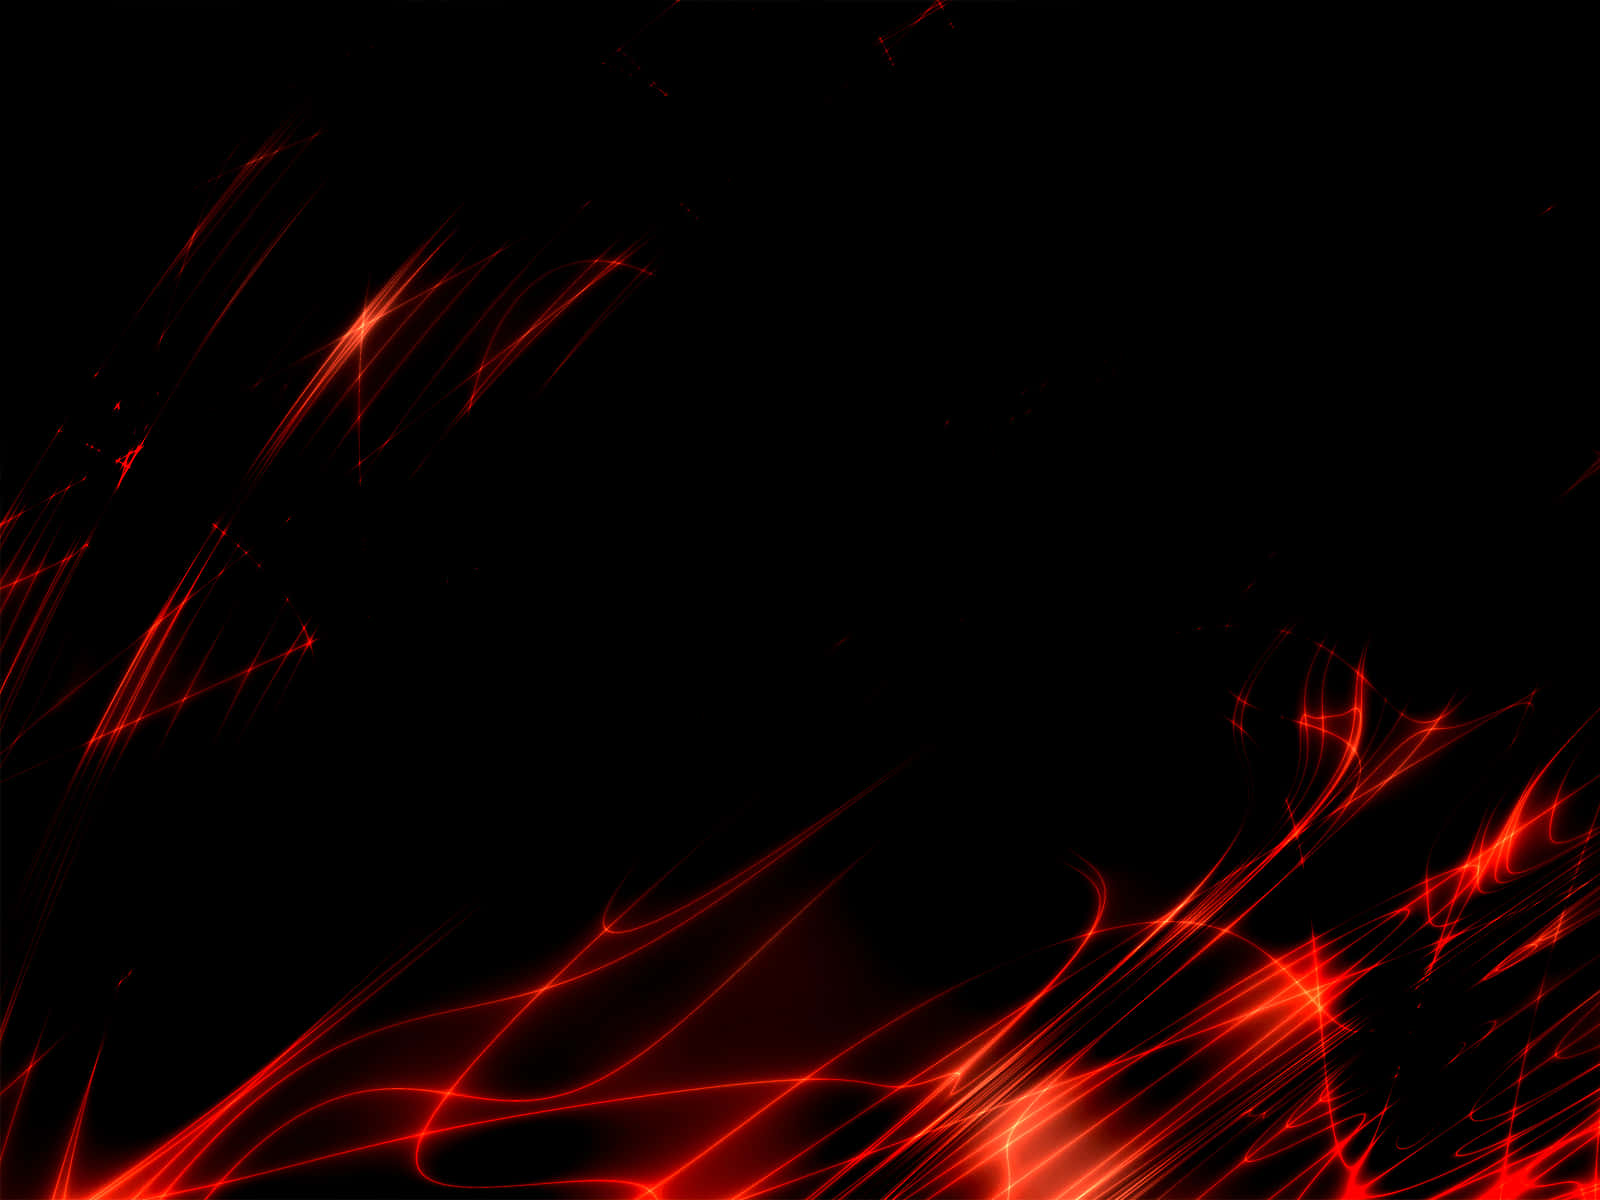 A Black Background With Red And Blue Lines